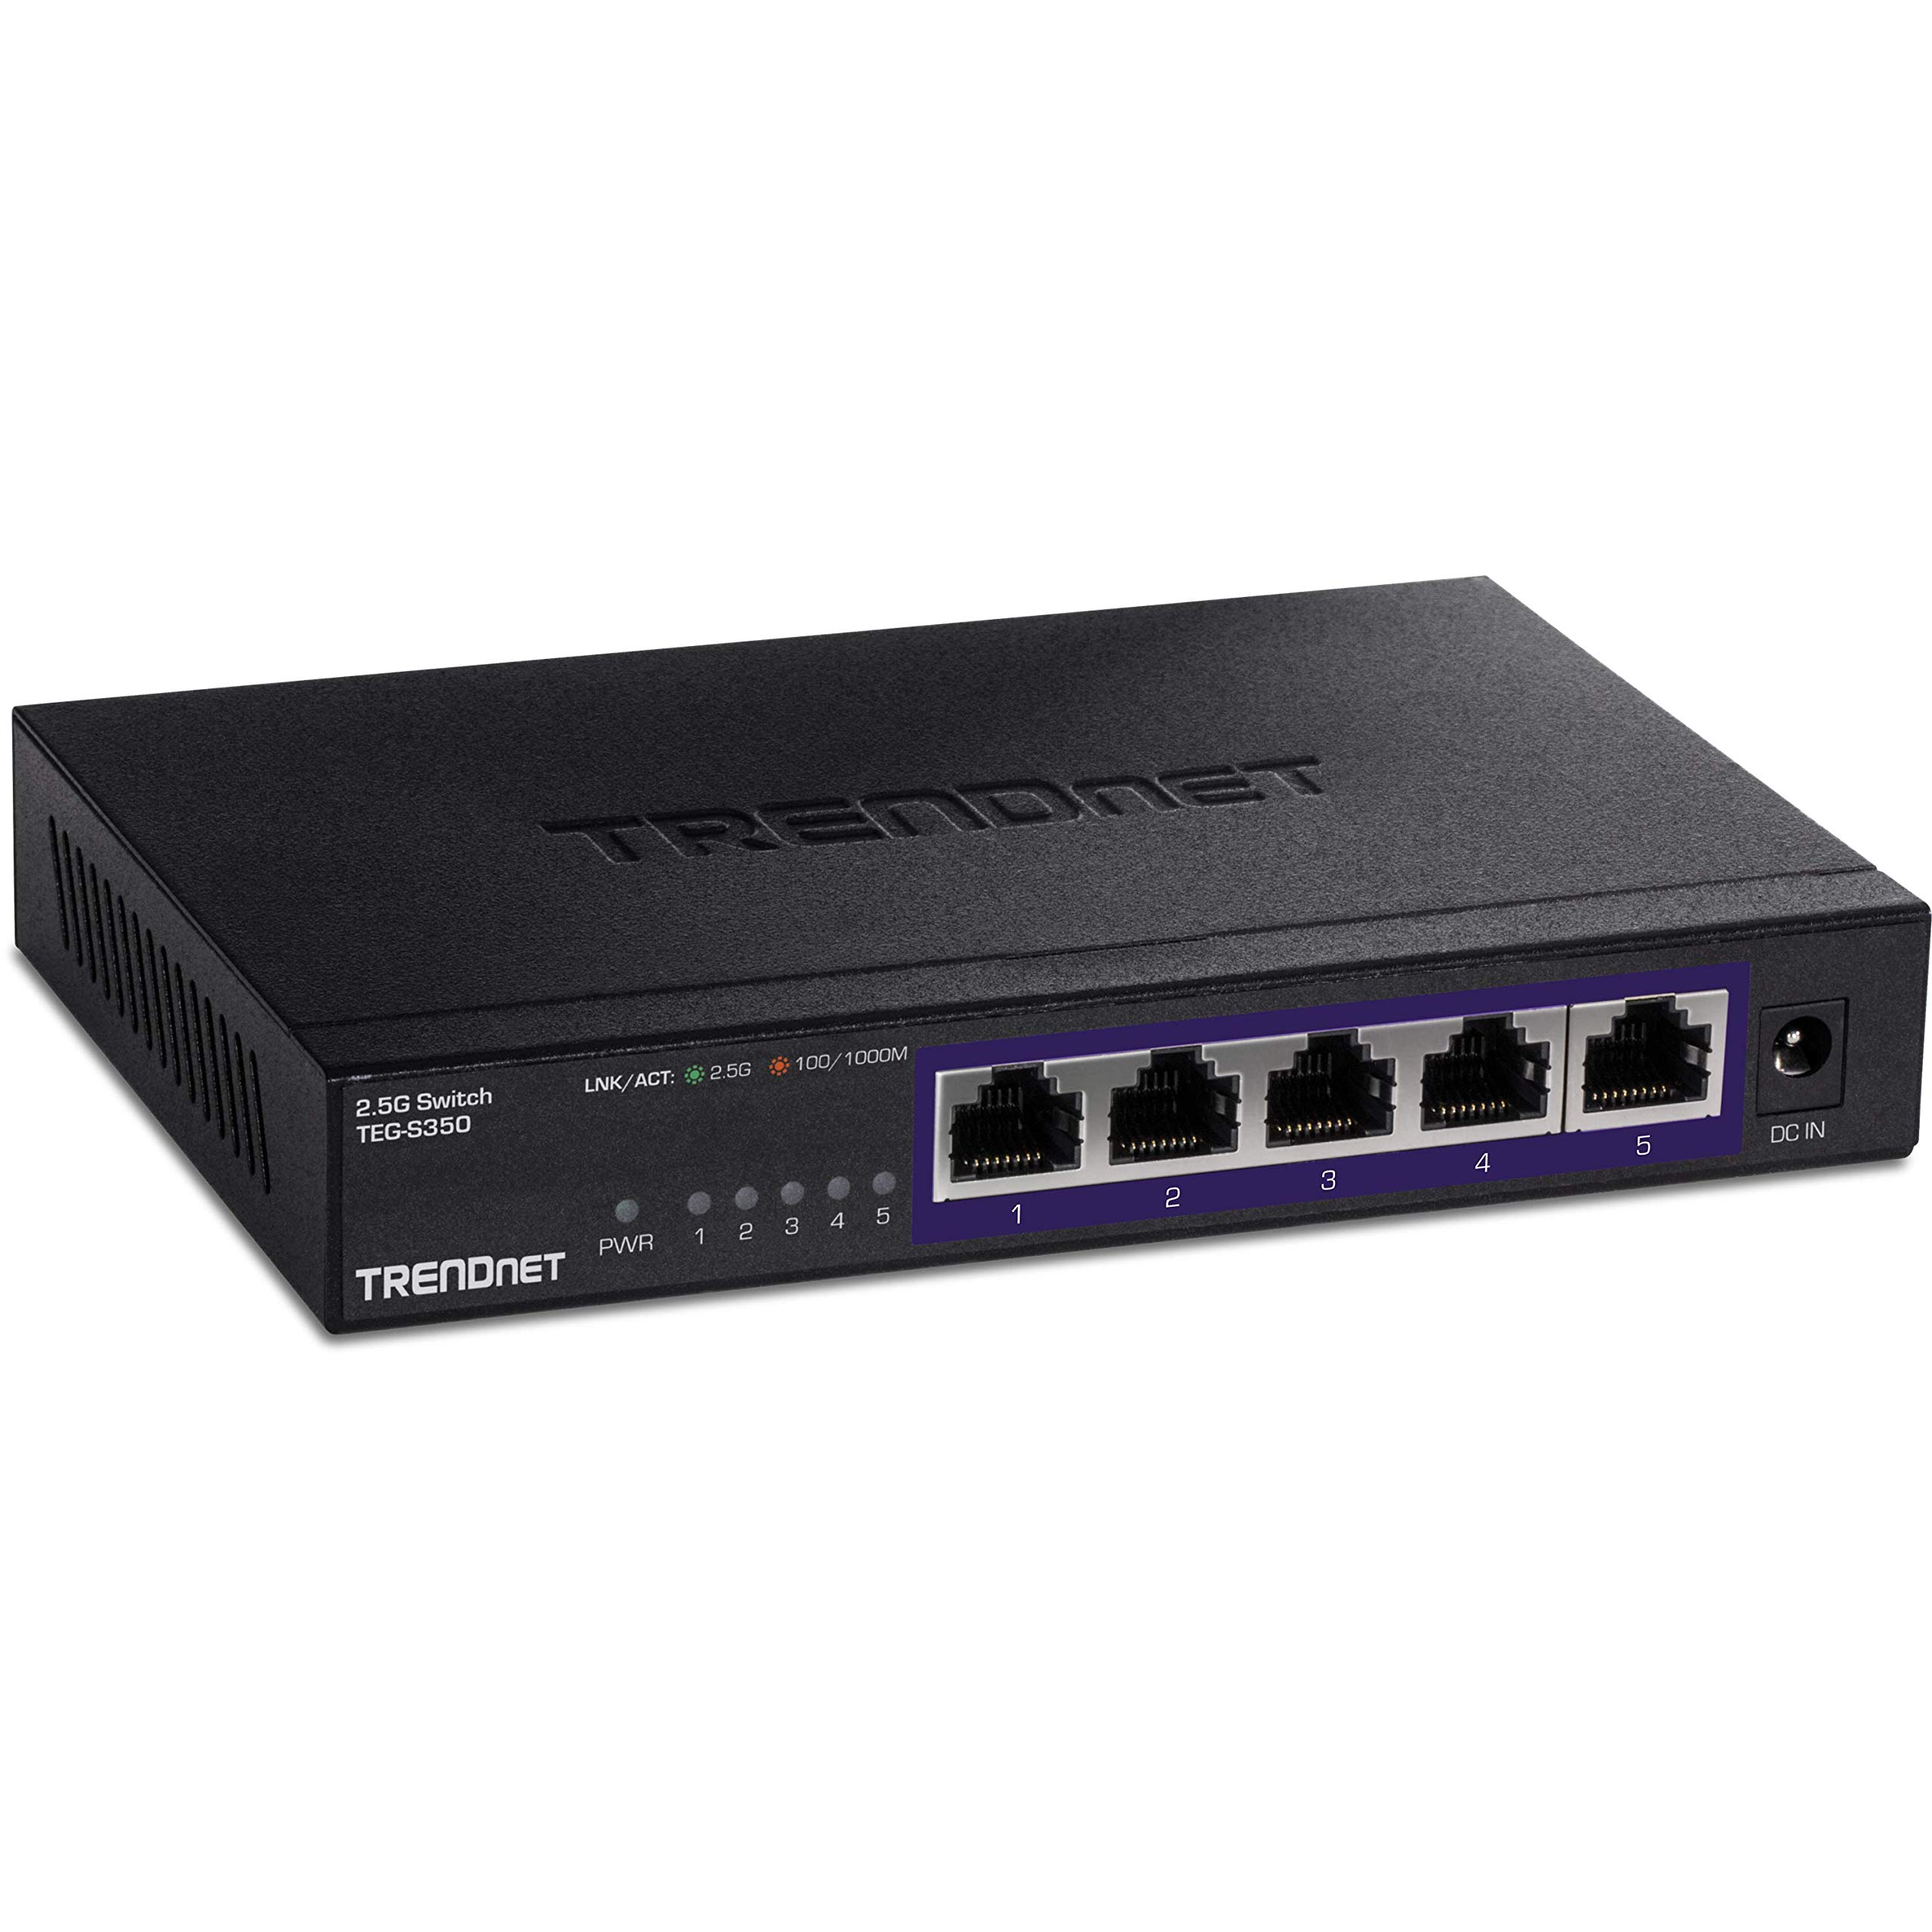 TRENDnet TEG-S350 5-Port Unmanaged 2.5G Switch, 5 x 2.5GBASE-T Ports, 25Gbps Switching Capacity $119 + Free Shipping at Amazon